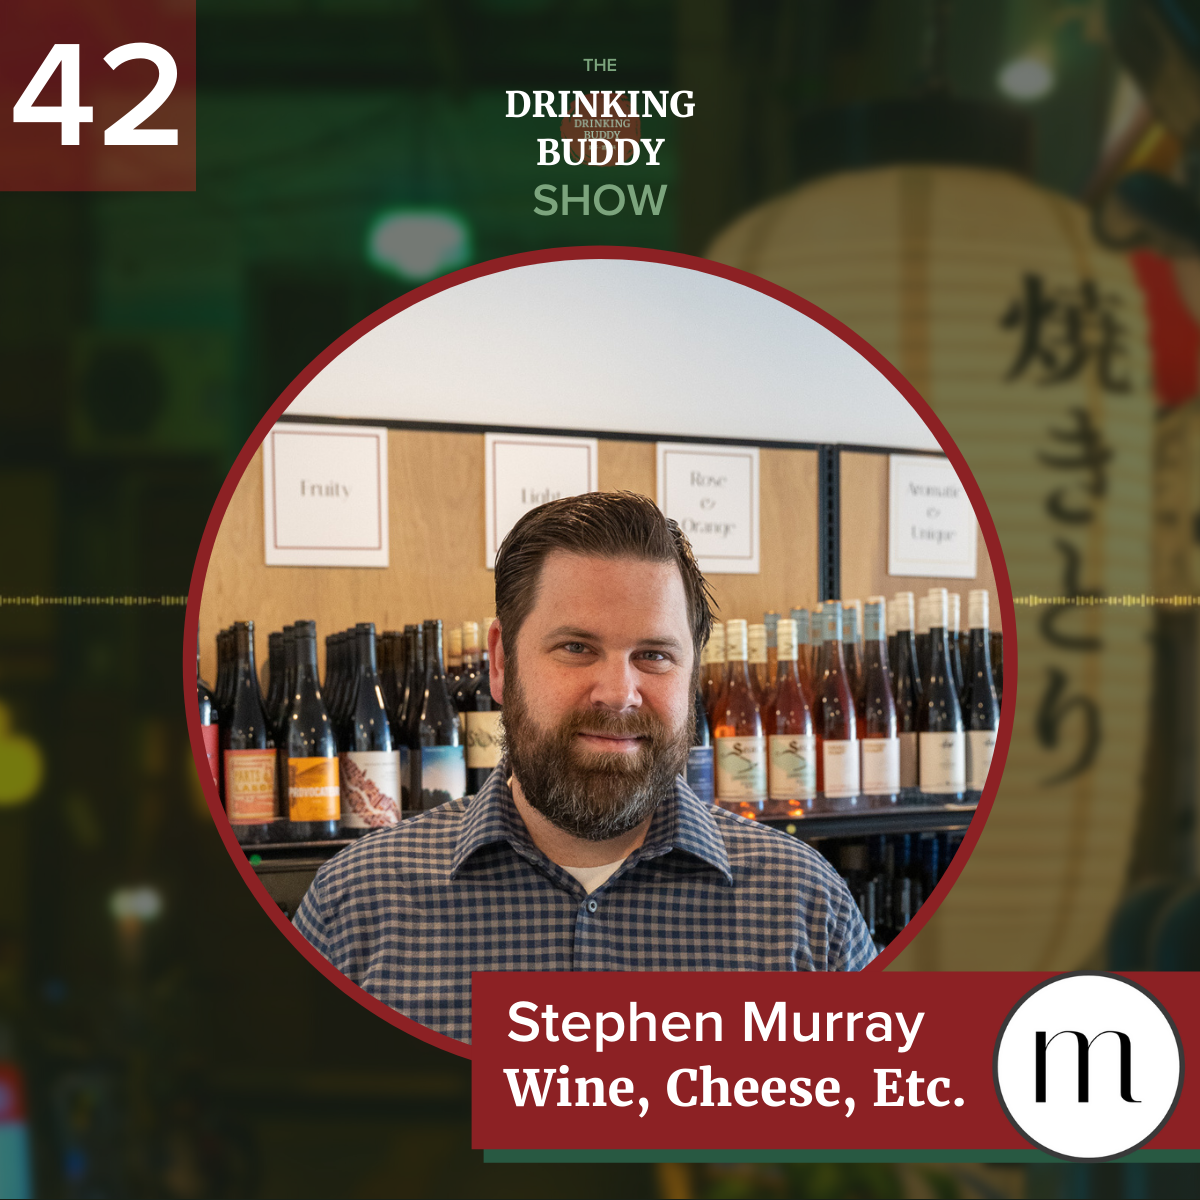 The Drinking Buddy Show Episode 42: Stephen Murray of Wine, Cheese, Etc. in Long Beach